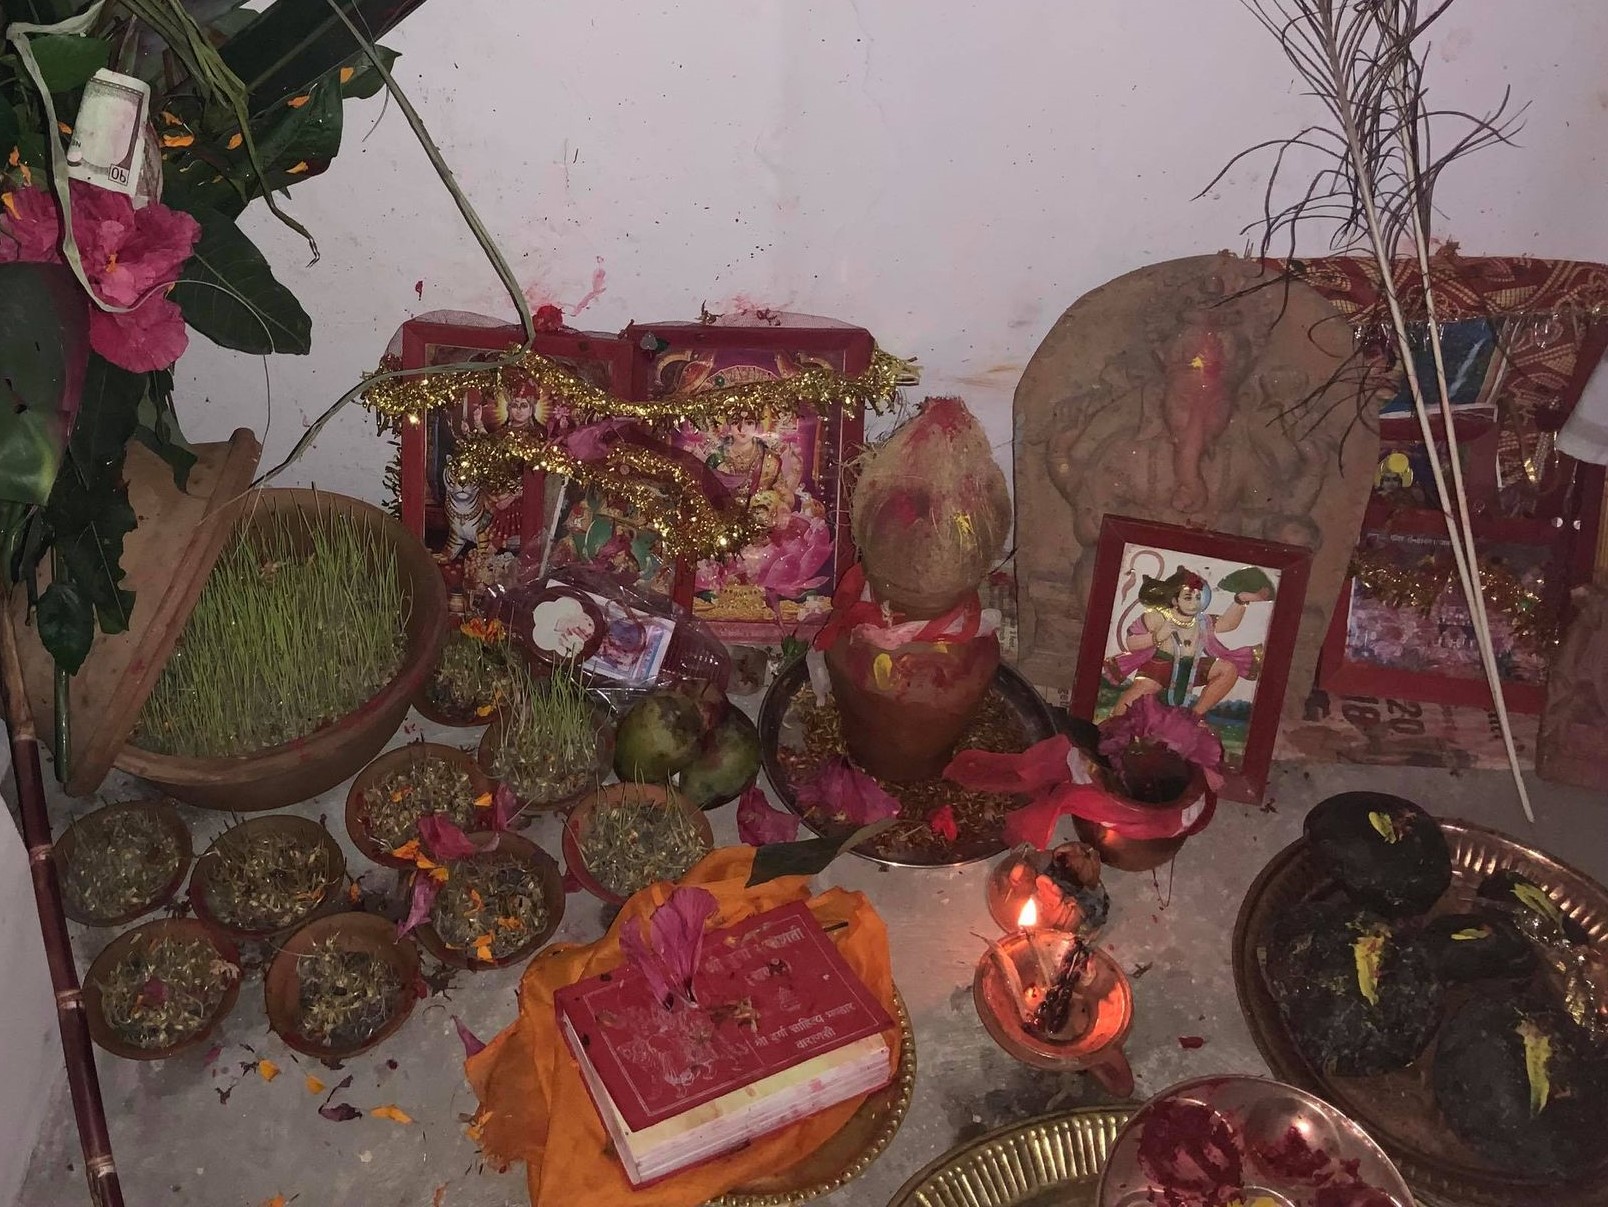 <h4>Kojagrath Purnima</h4>19 October 2021<br><br>Spiny Babbler has been working with languages, arts, and cultures since 1991.<br>On Kojagrath Purnima, or full moon day of Dasain, after 15 days of festivities, the sands, the flowers, shoots, tika,a nd celebrations of the festival is put to rest at the river banks of sacred rivers or somewhere peaceful and pure.<br>Kojagrath means to ‘stay awake’ and the belief is that Goddess Lakshmi will visit homes and will call out asking, “Who wakes?” Those who answer will receive a shower of her blessings.<br>Also known as Kumar Purnima, Kojagiri Purnima, Navana Purnima, or Kaumudi Purnima and is deemed auspicious by many religious scriptures of the East.<br>Both Buddhists and Hindus offer worship at Swayambhu and observe a vigil lighting the great lamp, or the Mahadeep.